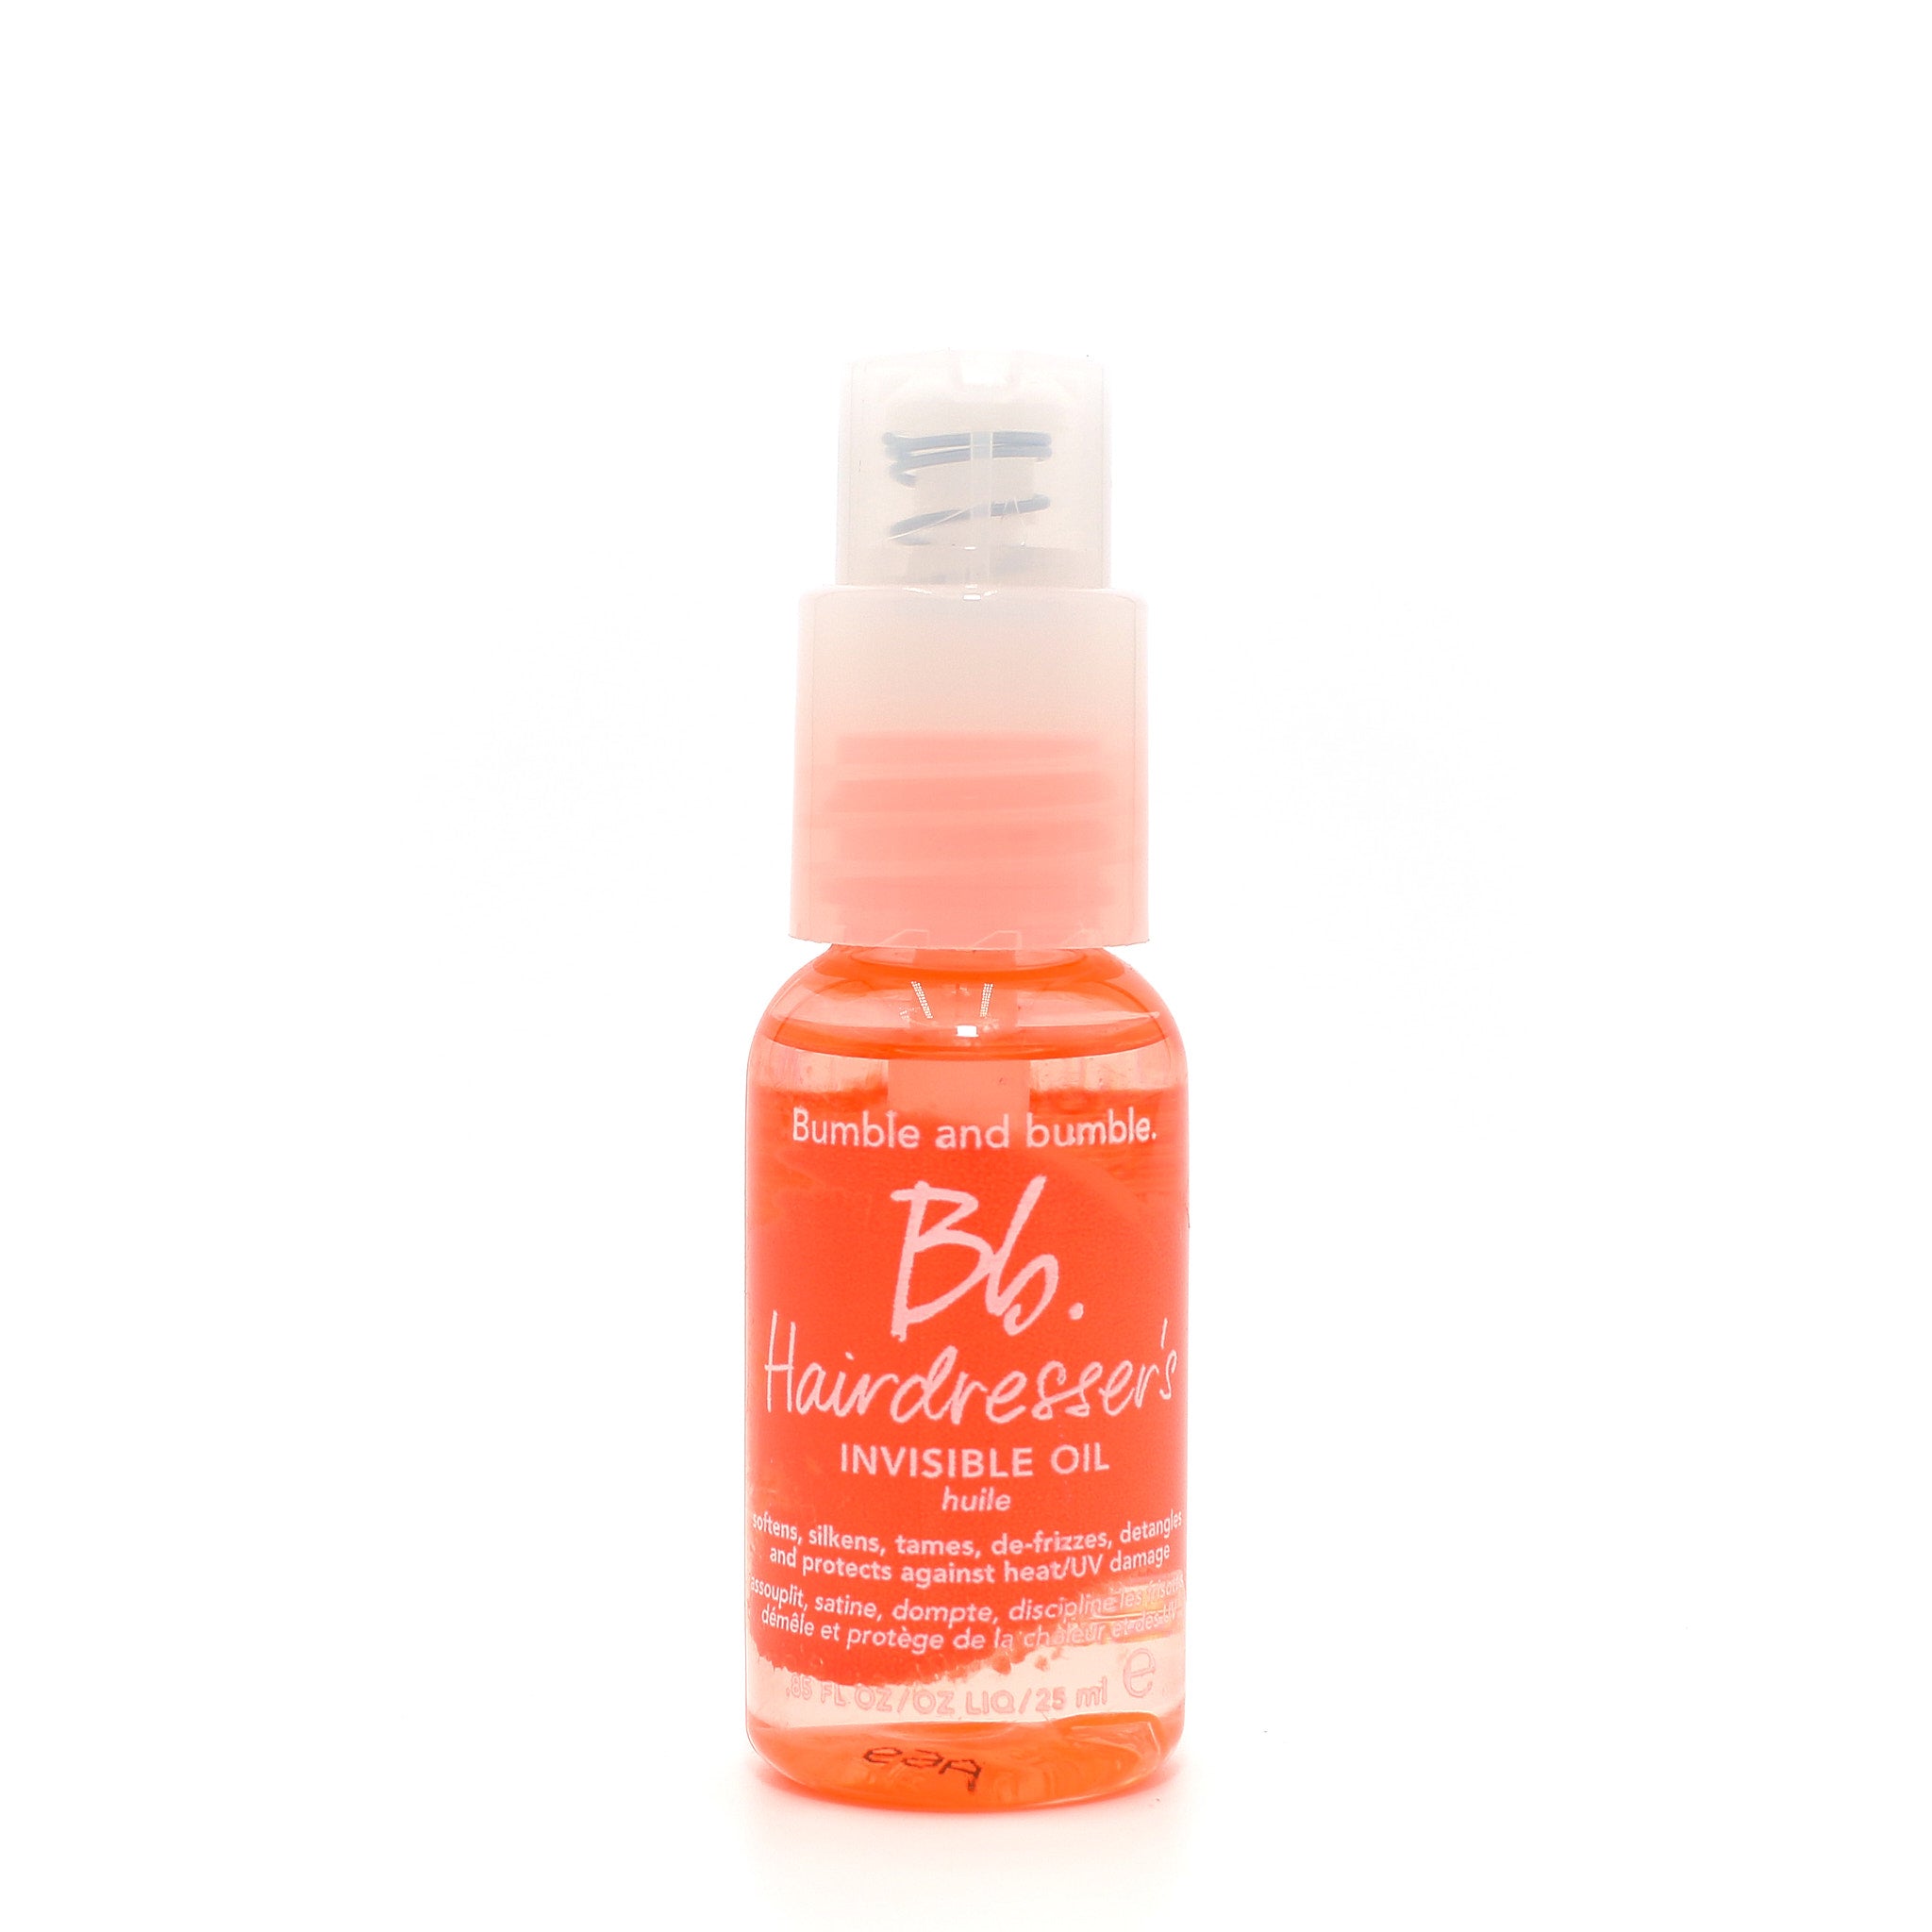 Bumble and Bumble Bb Hairdressers Invisible Oil 0.85 oz